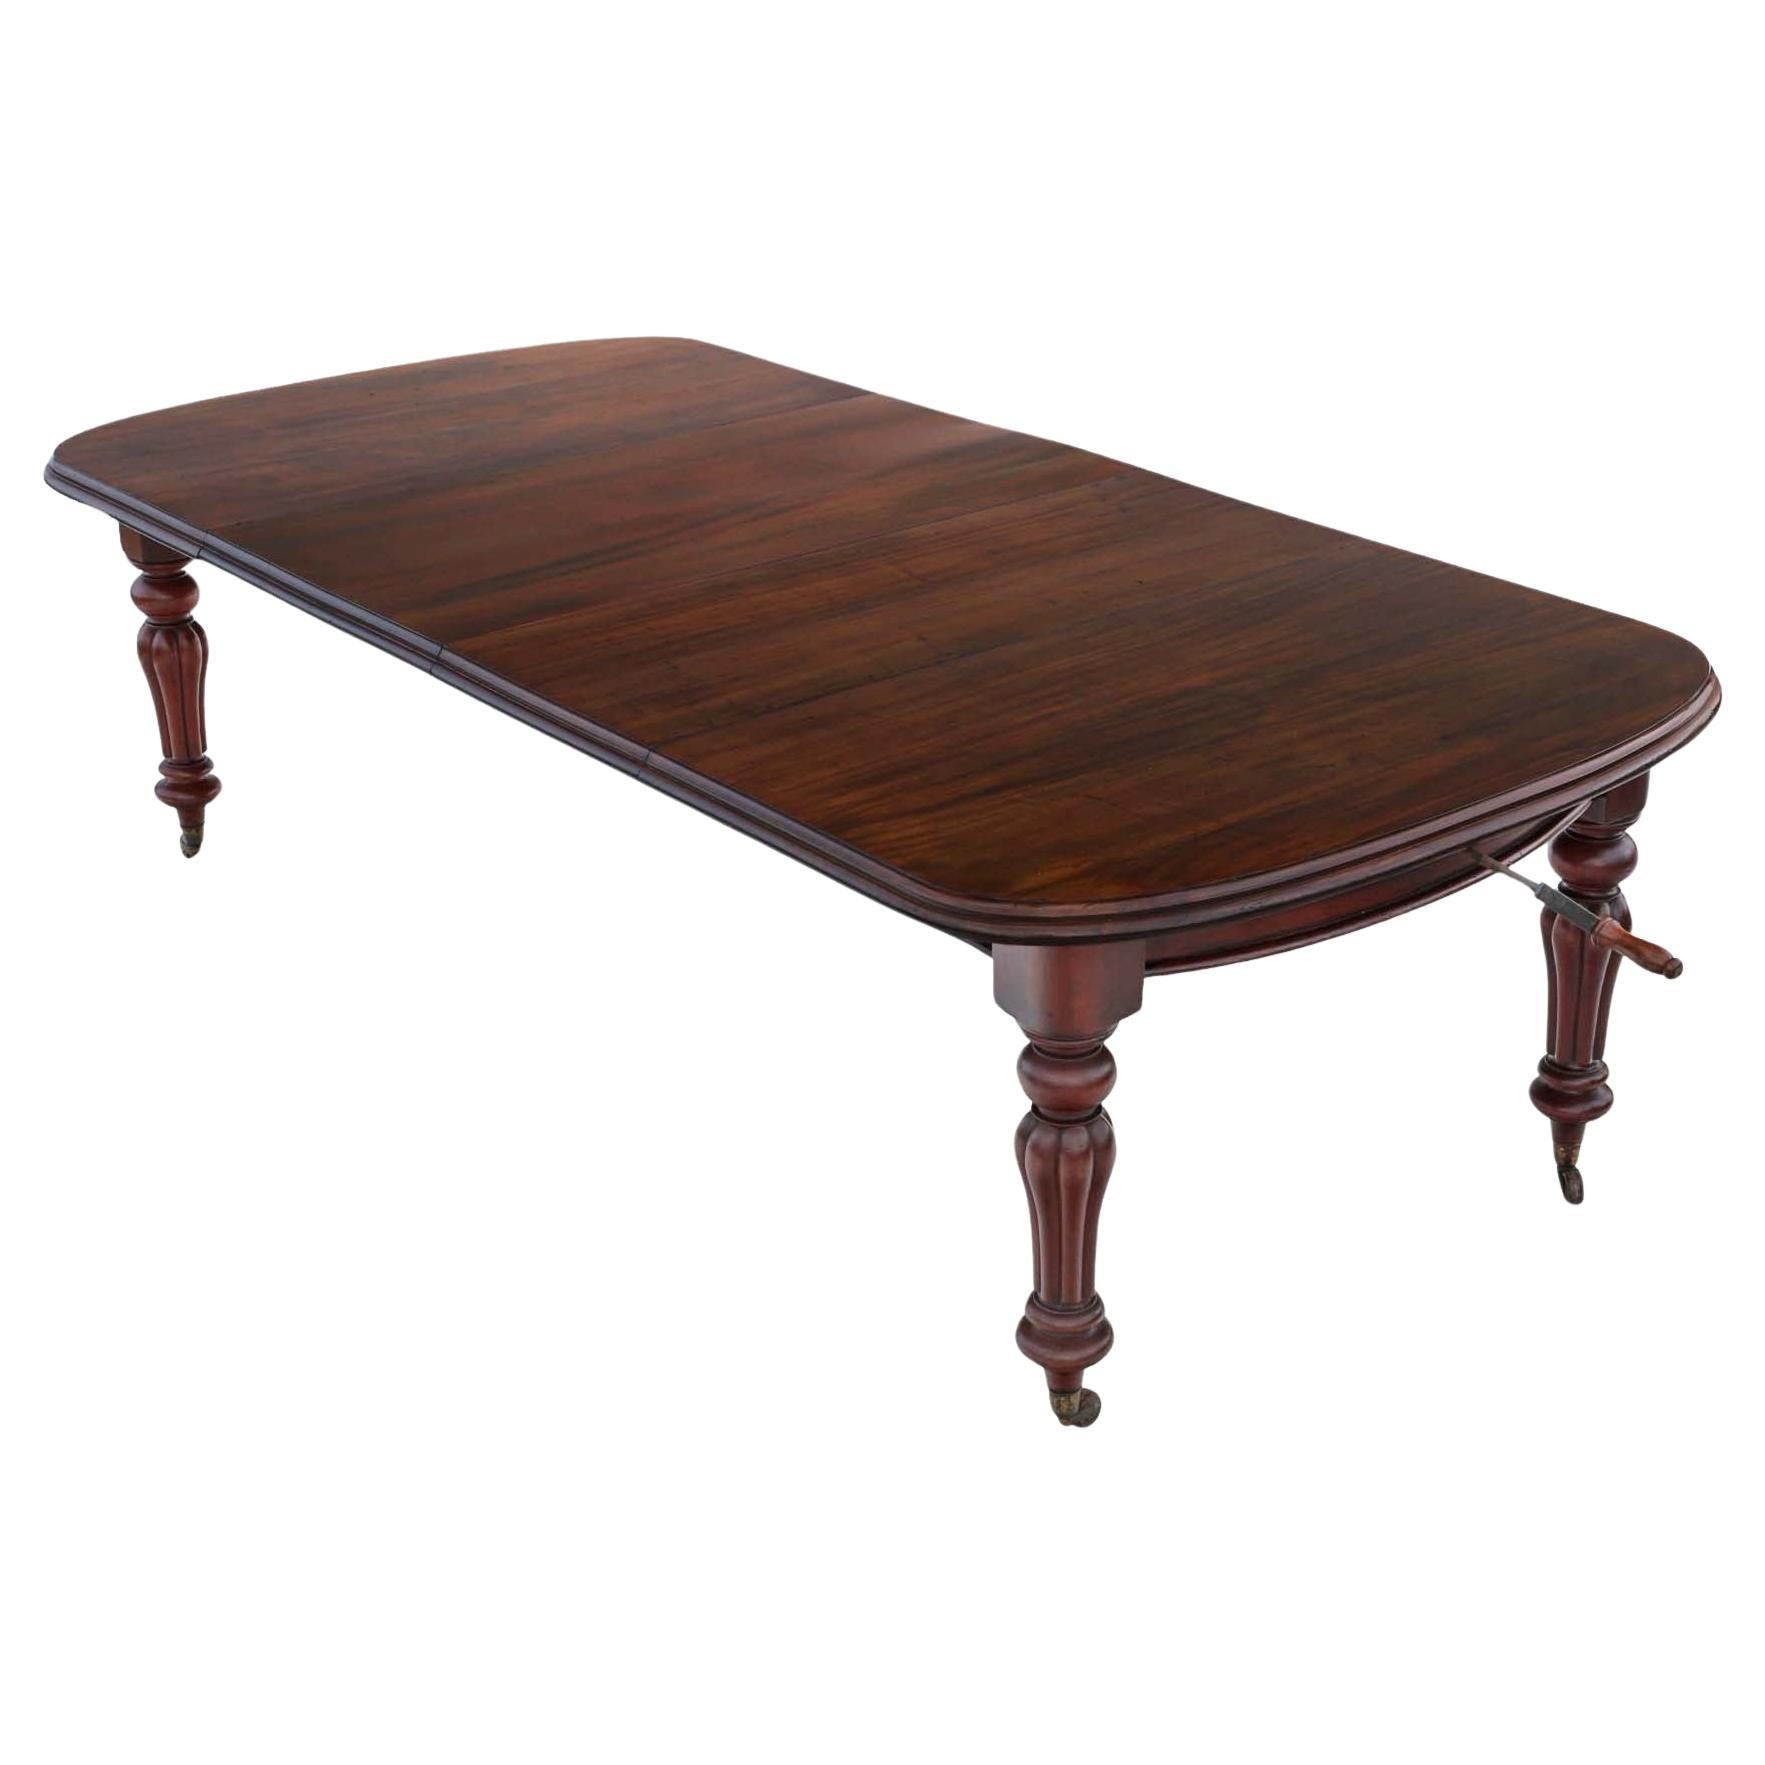 Antique Mid-19th Century Mahogany Extending Dining Table - Large, Fine Quality For Sale